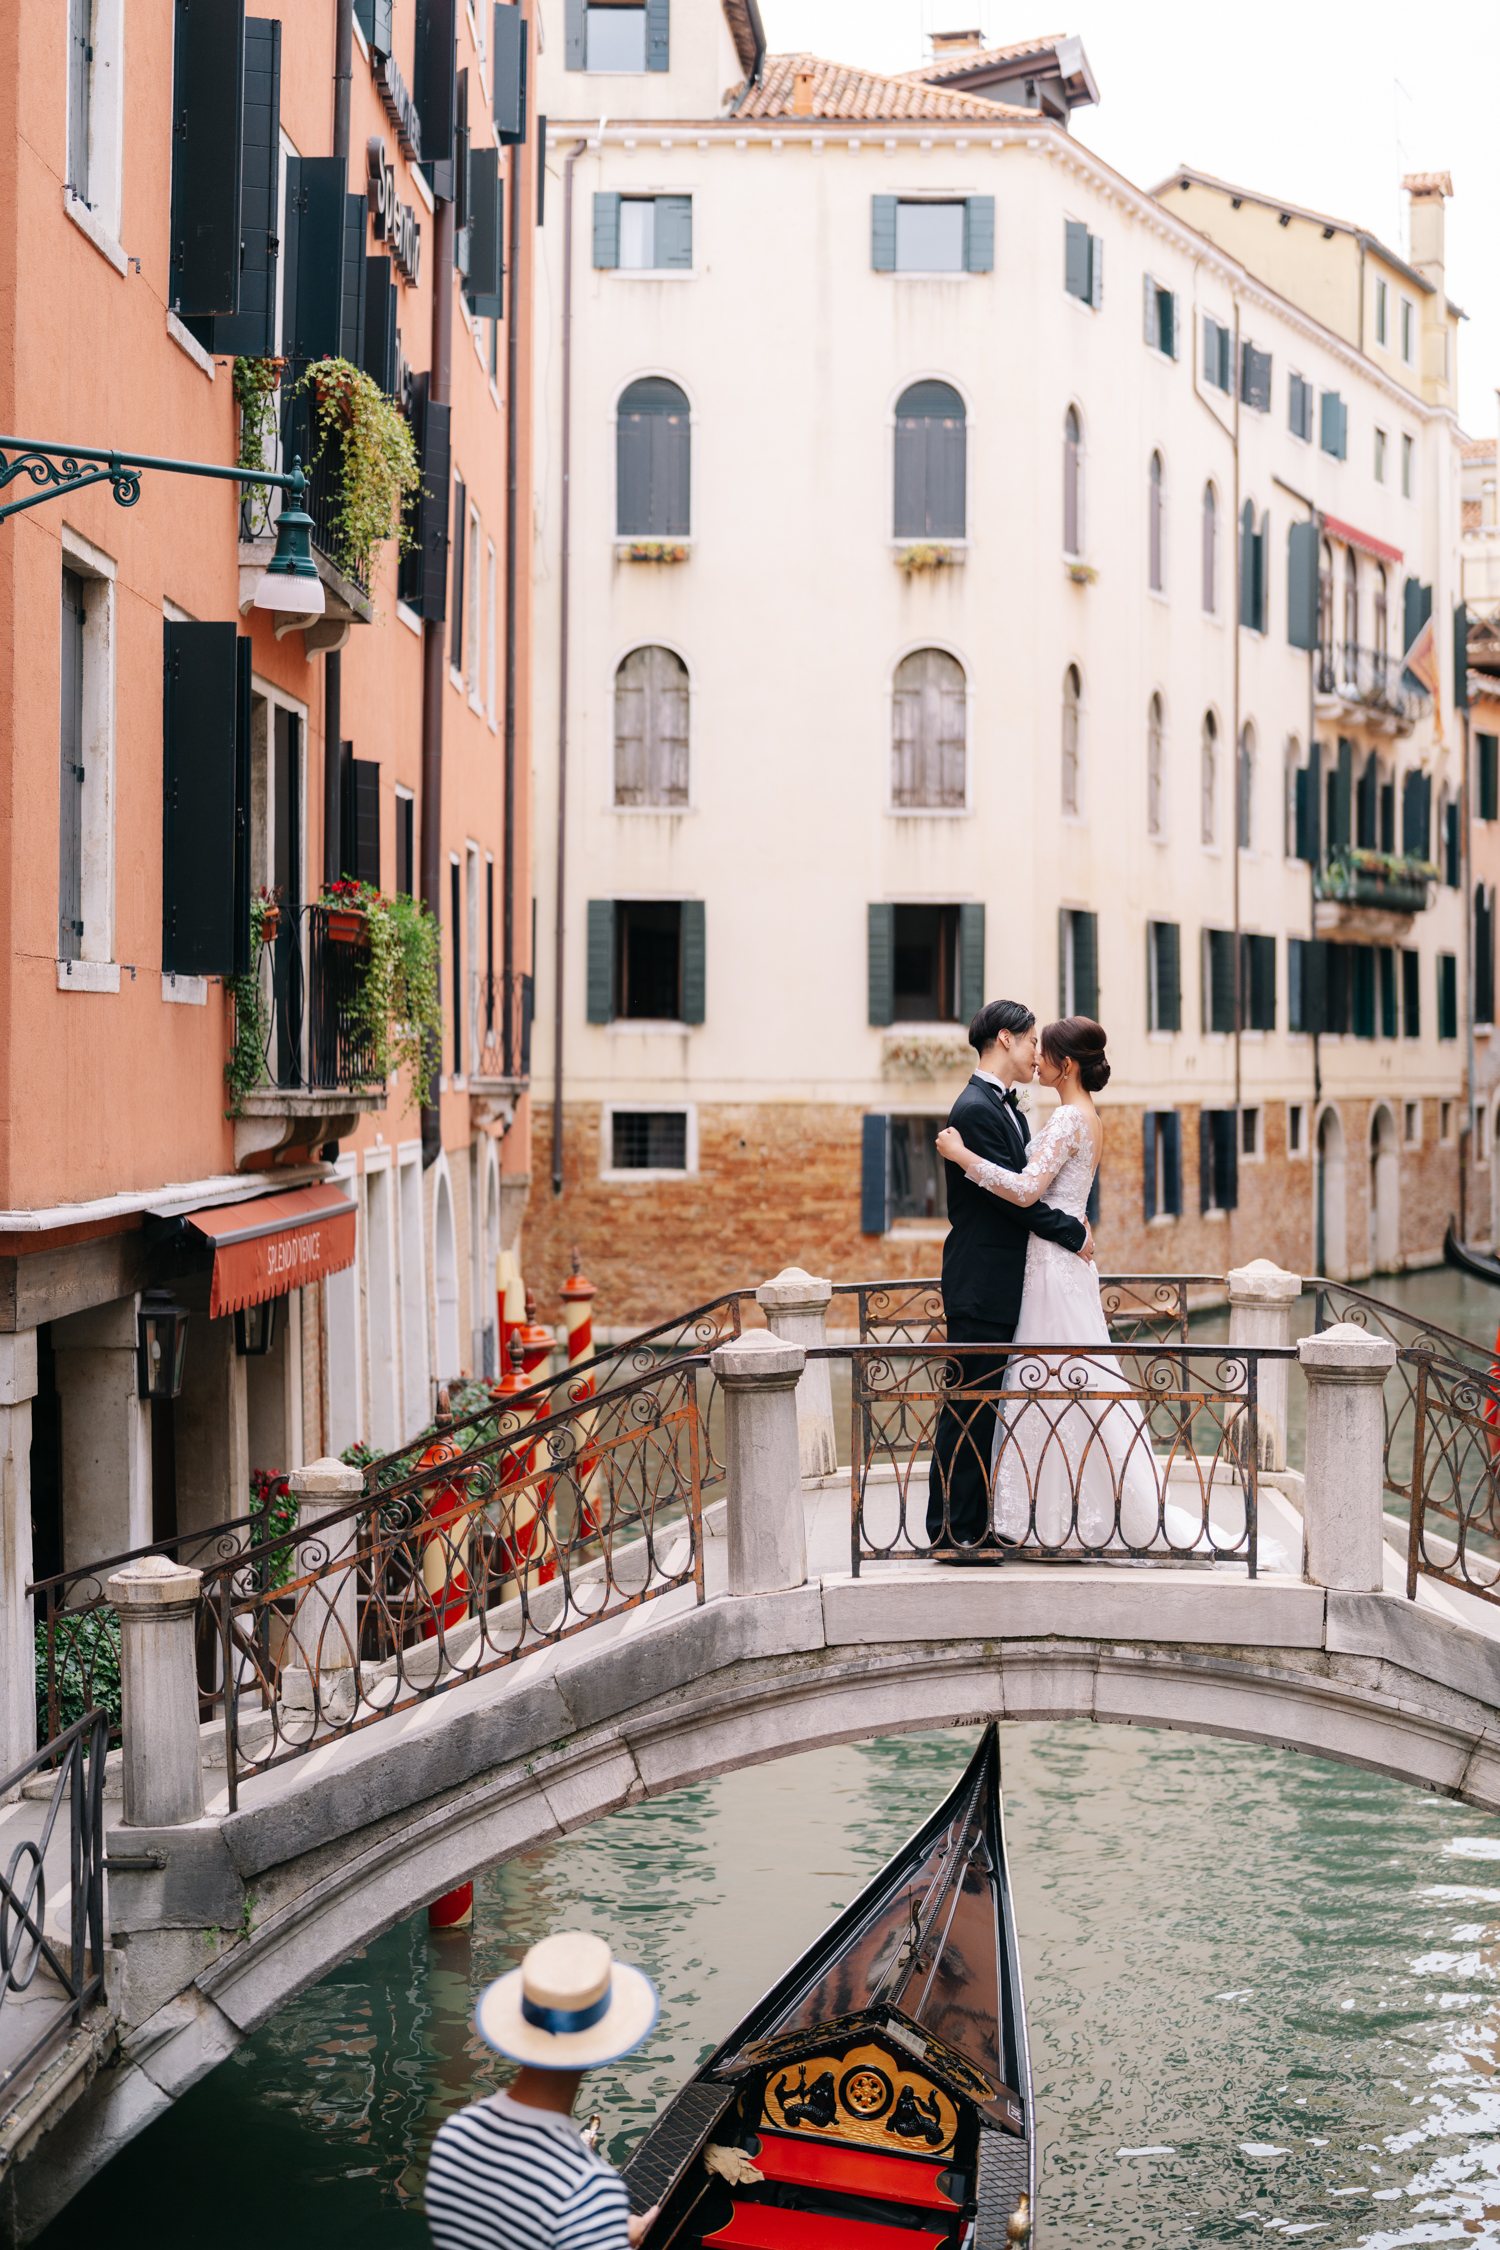 If you are looking for an ultimate romantic wedding photoshoot in Venice photographer Alina Indi will document your day in Italy